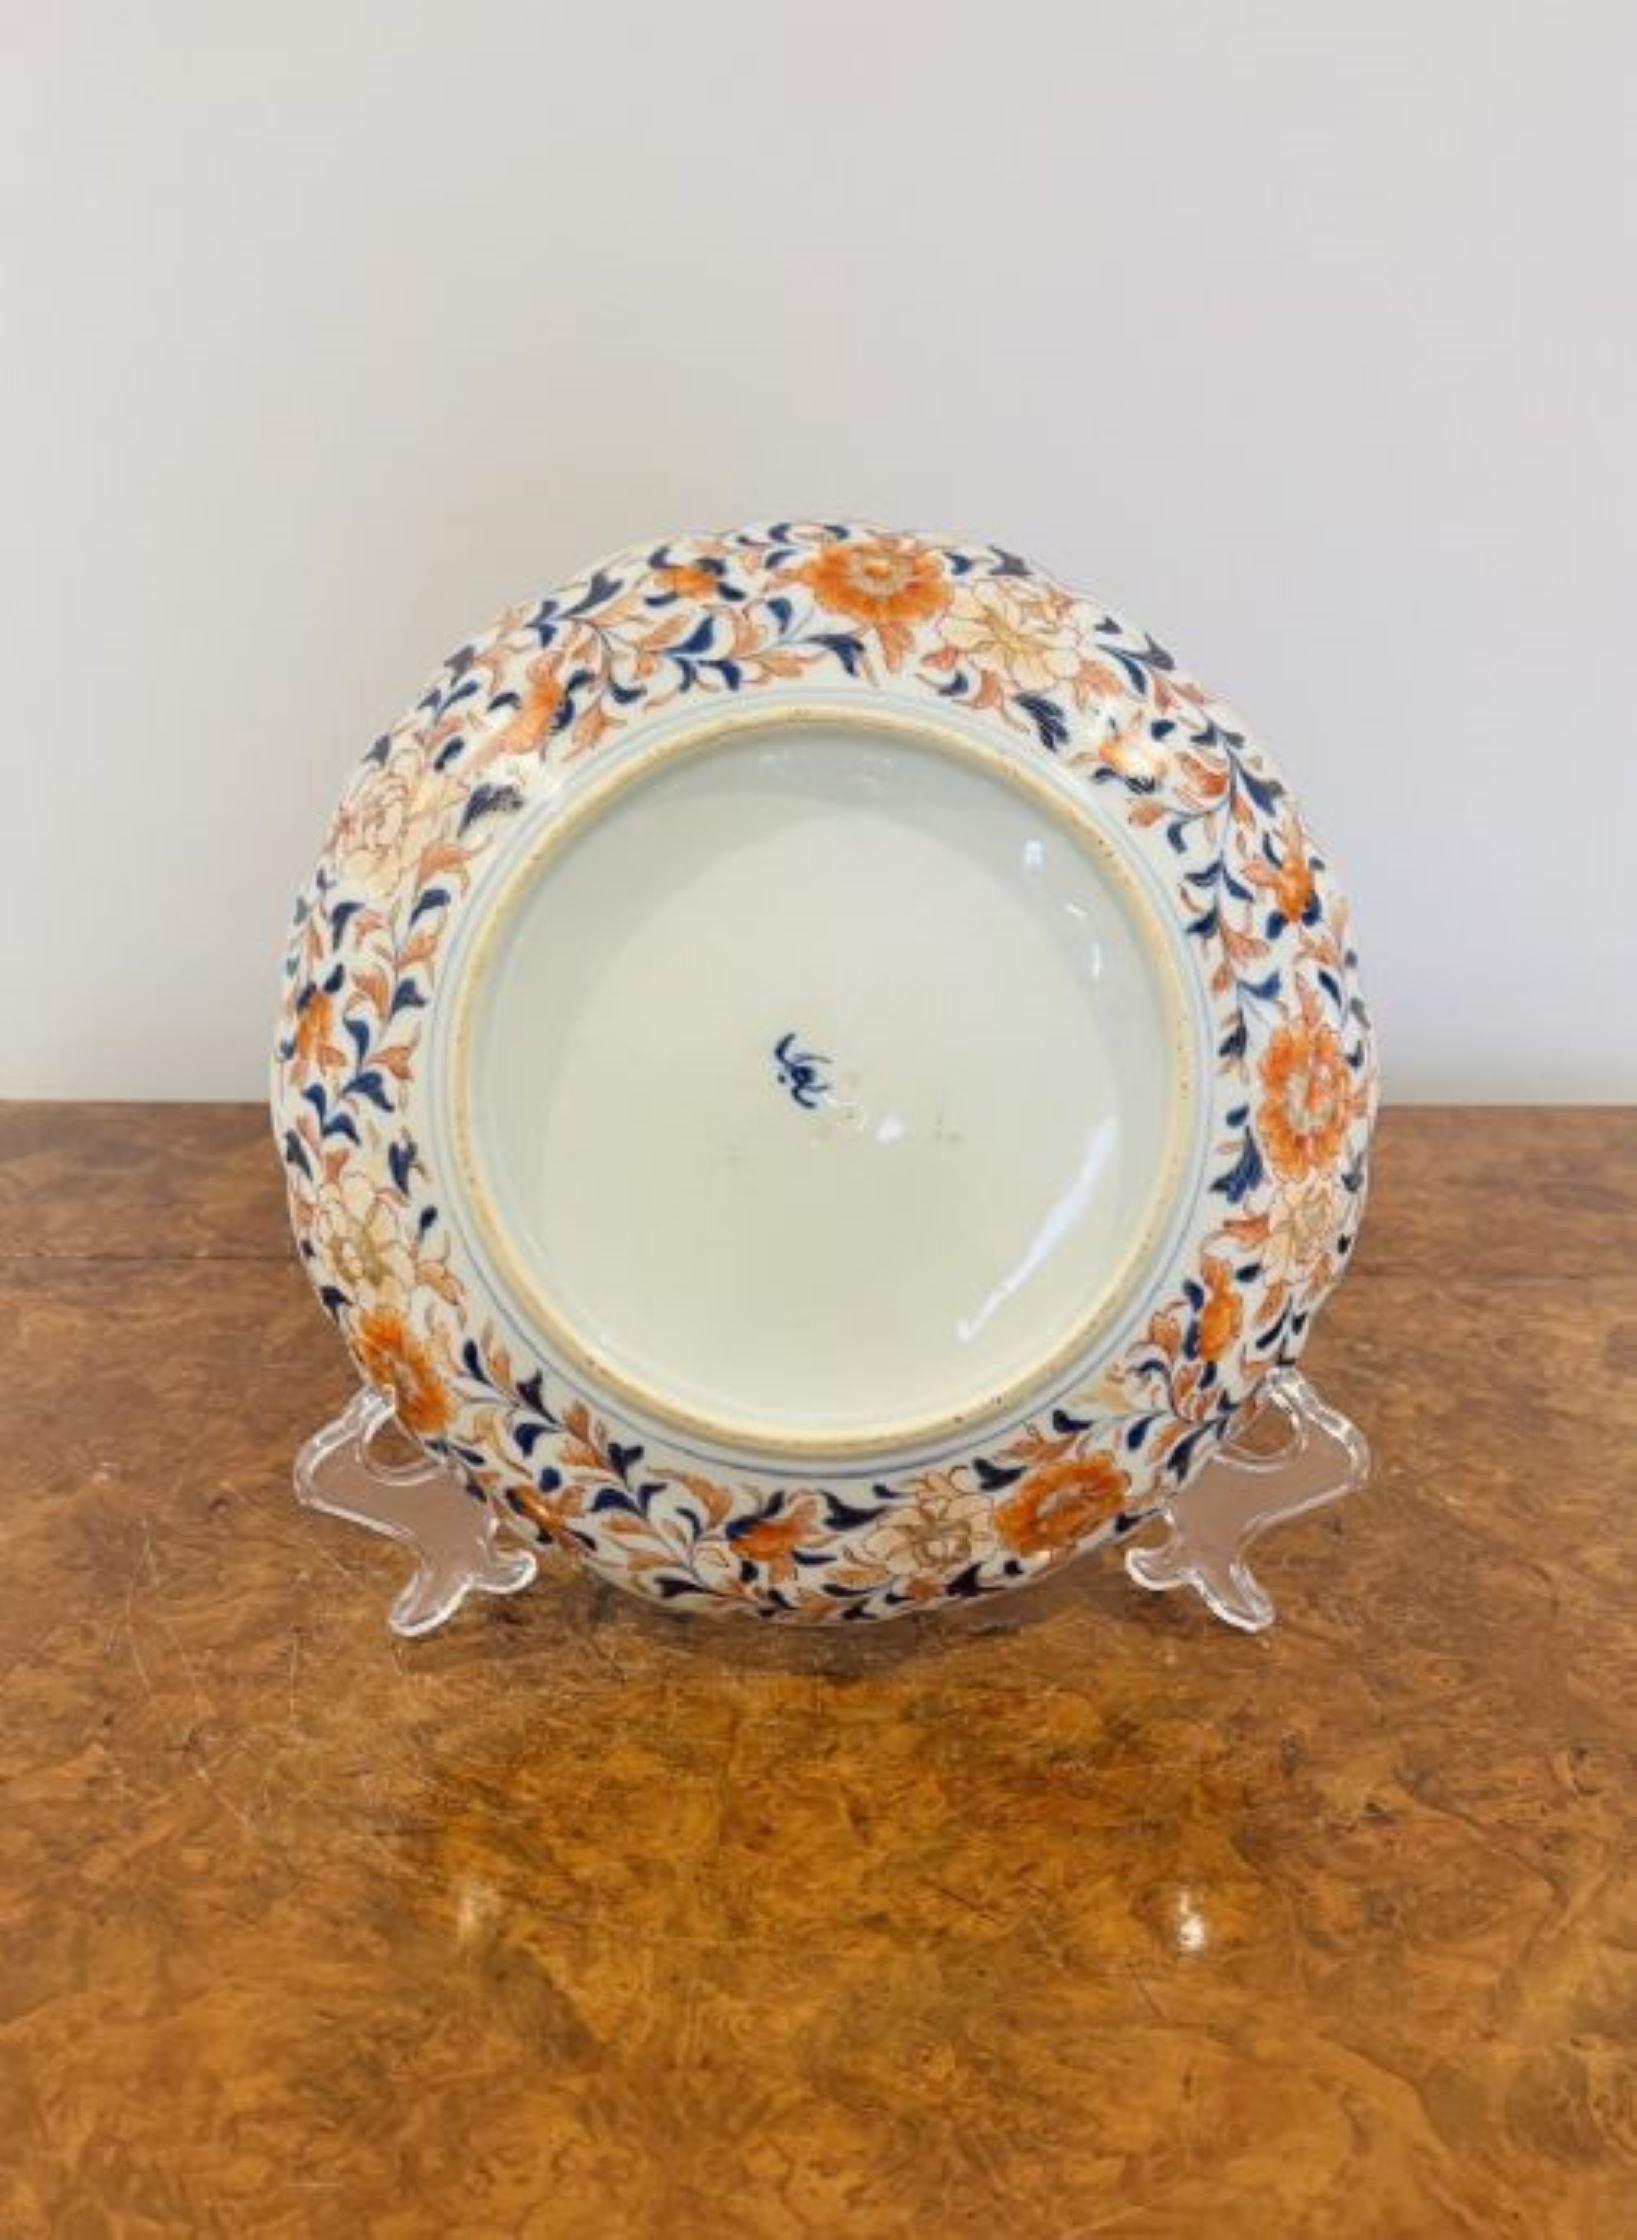 Quality antique Japanese imari plate with a scalloped shaped edge having hand painted panels to the outside with flowers and leaves and to the centre two dragons hand painted in wonderful red, blue, green, white & gold colours.
Small chip to the top